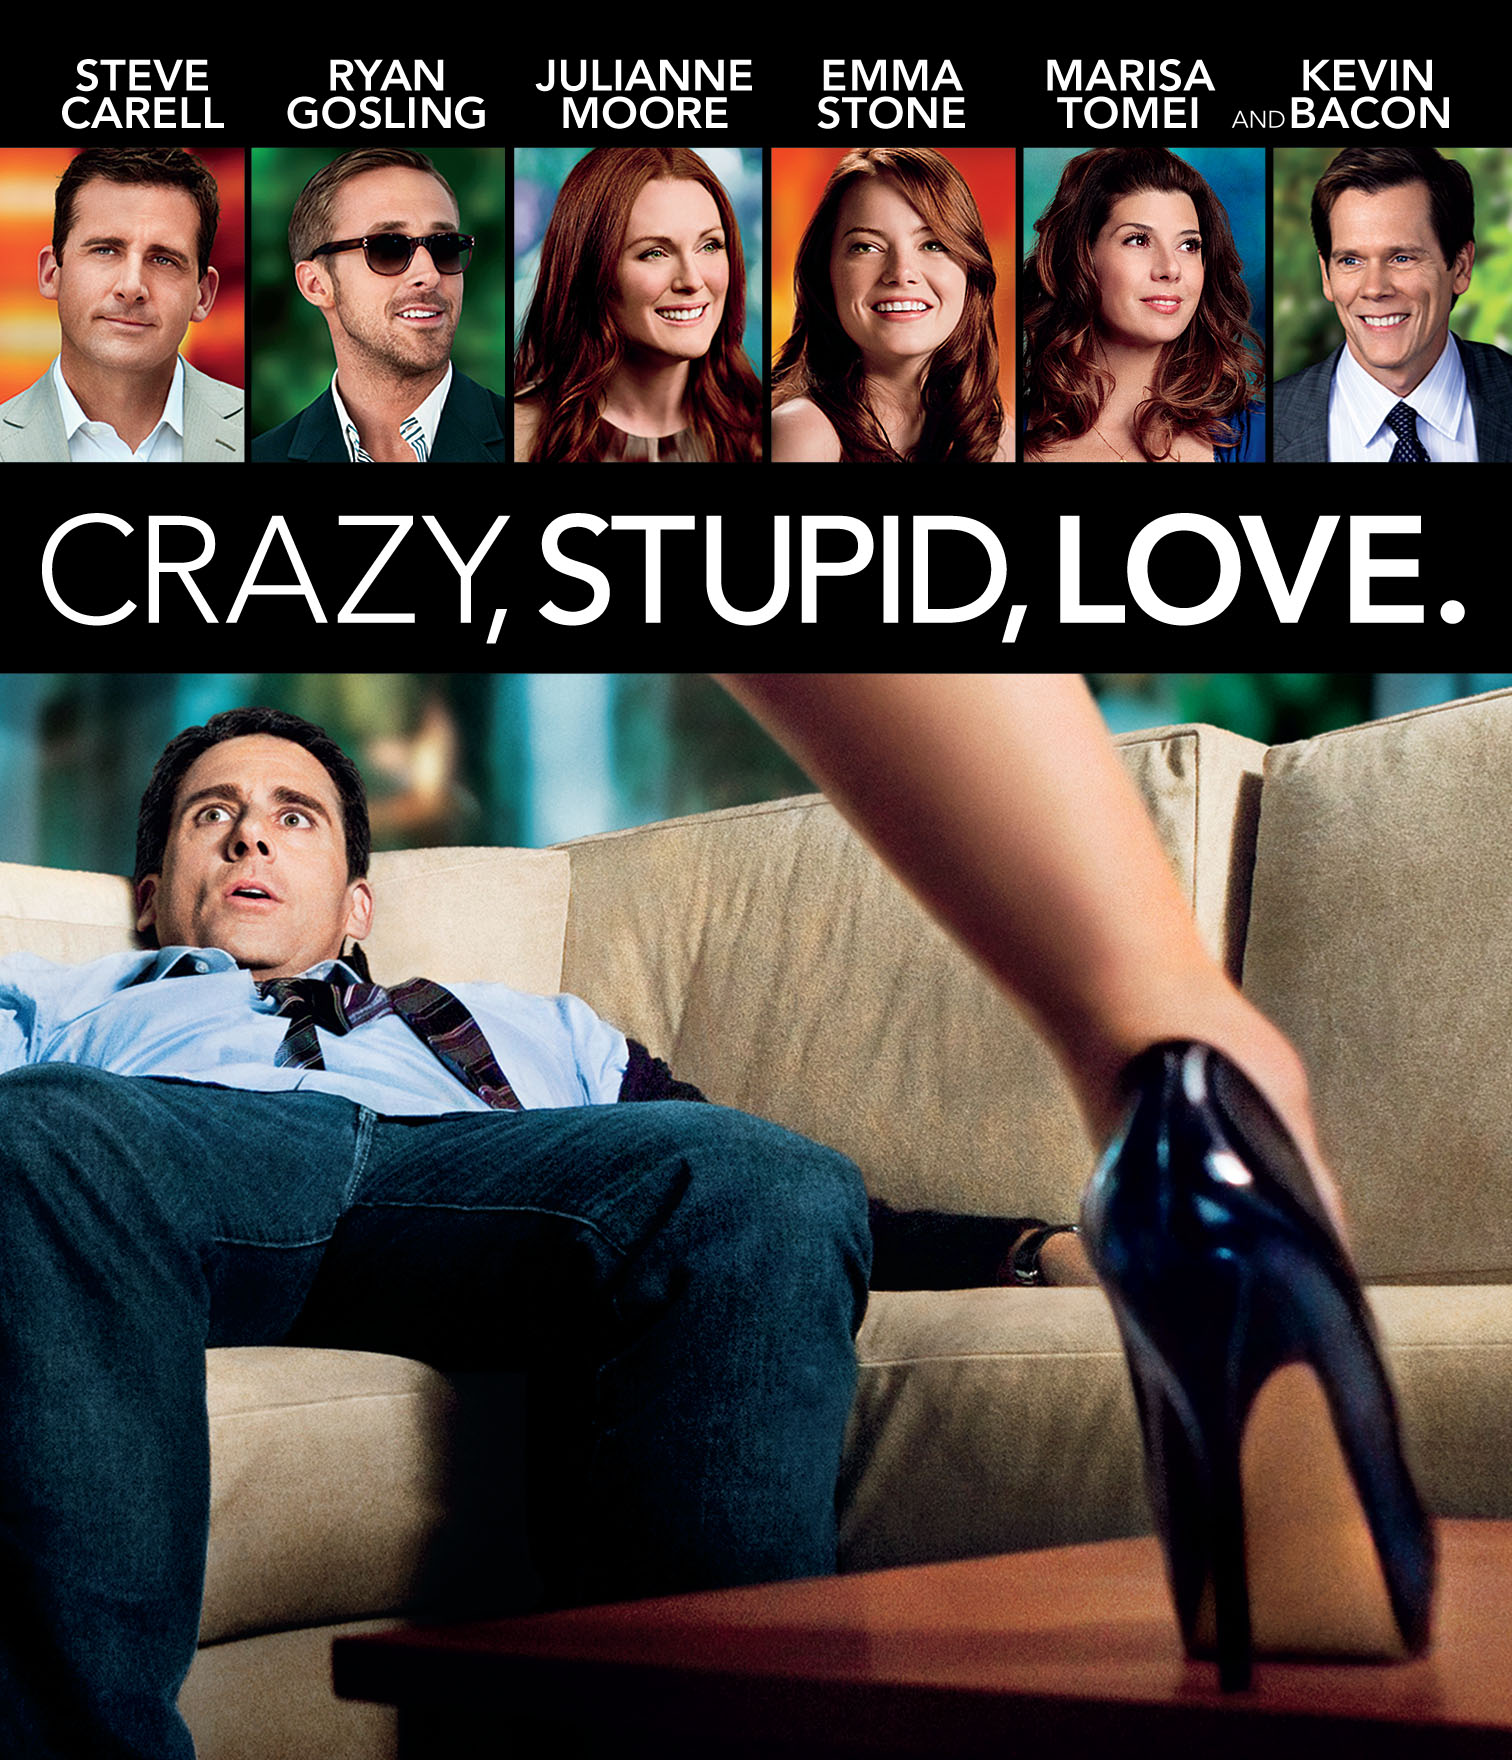 CRAZY STUPID LOVE_COMBO BD (1000250398).indd